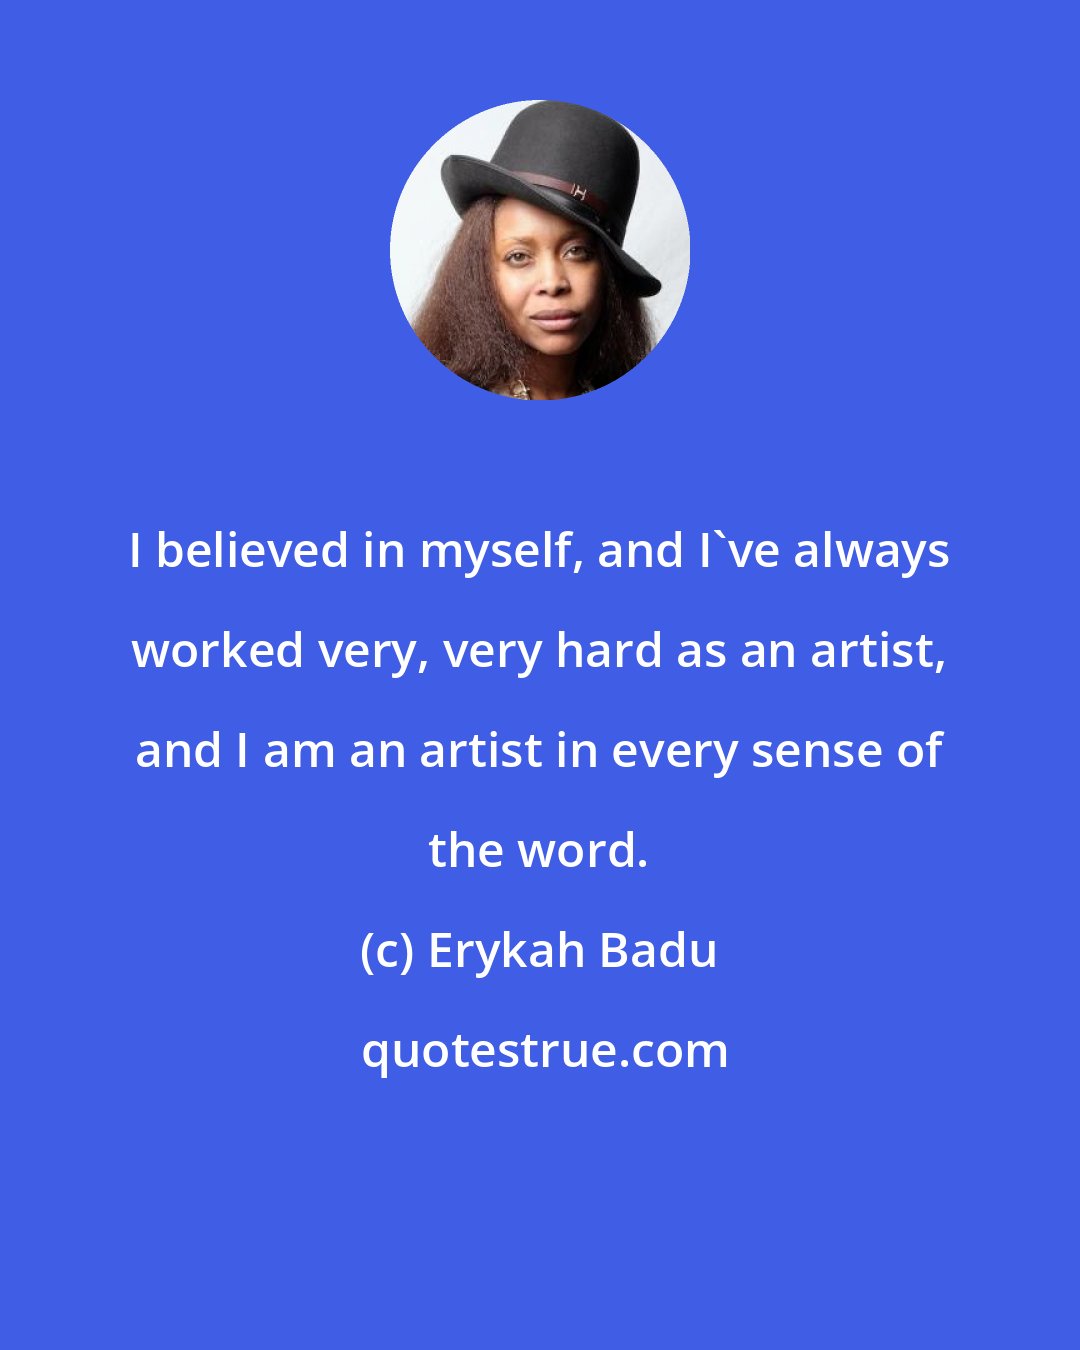 Erykah Badu: I believed in myself, and I've always worked very, very hard as an artist, and I am an artist in every sense of the word.